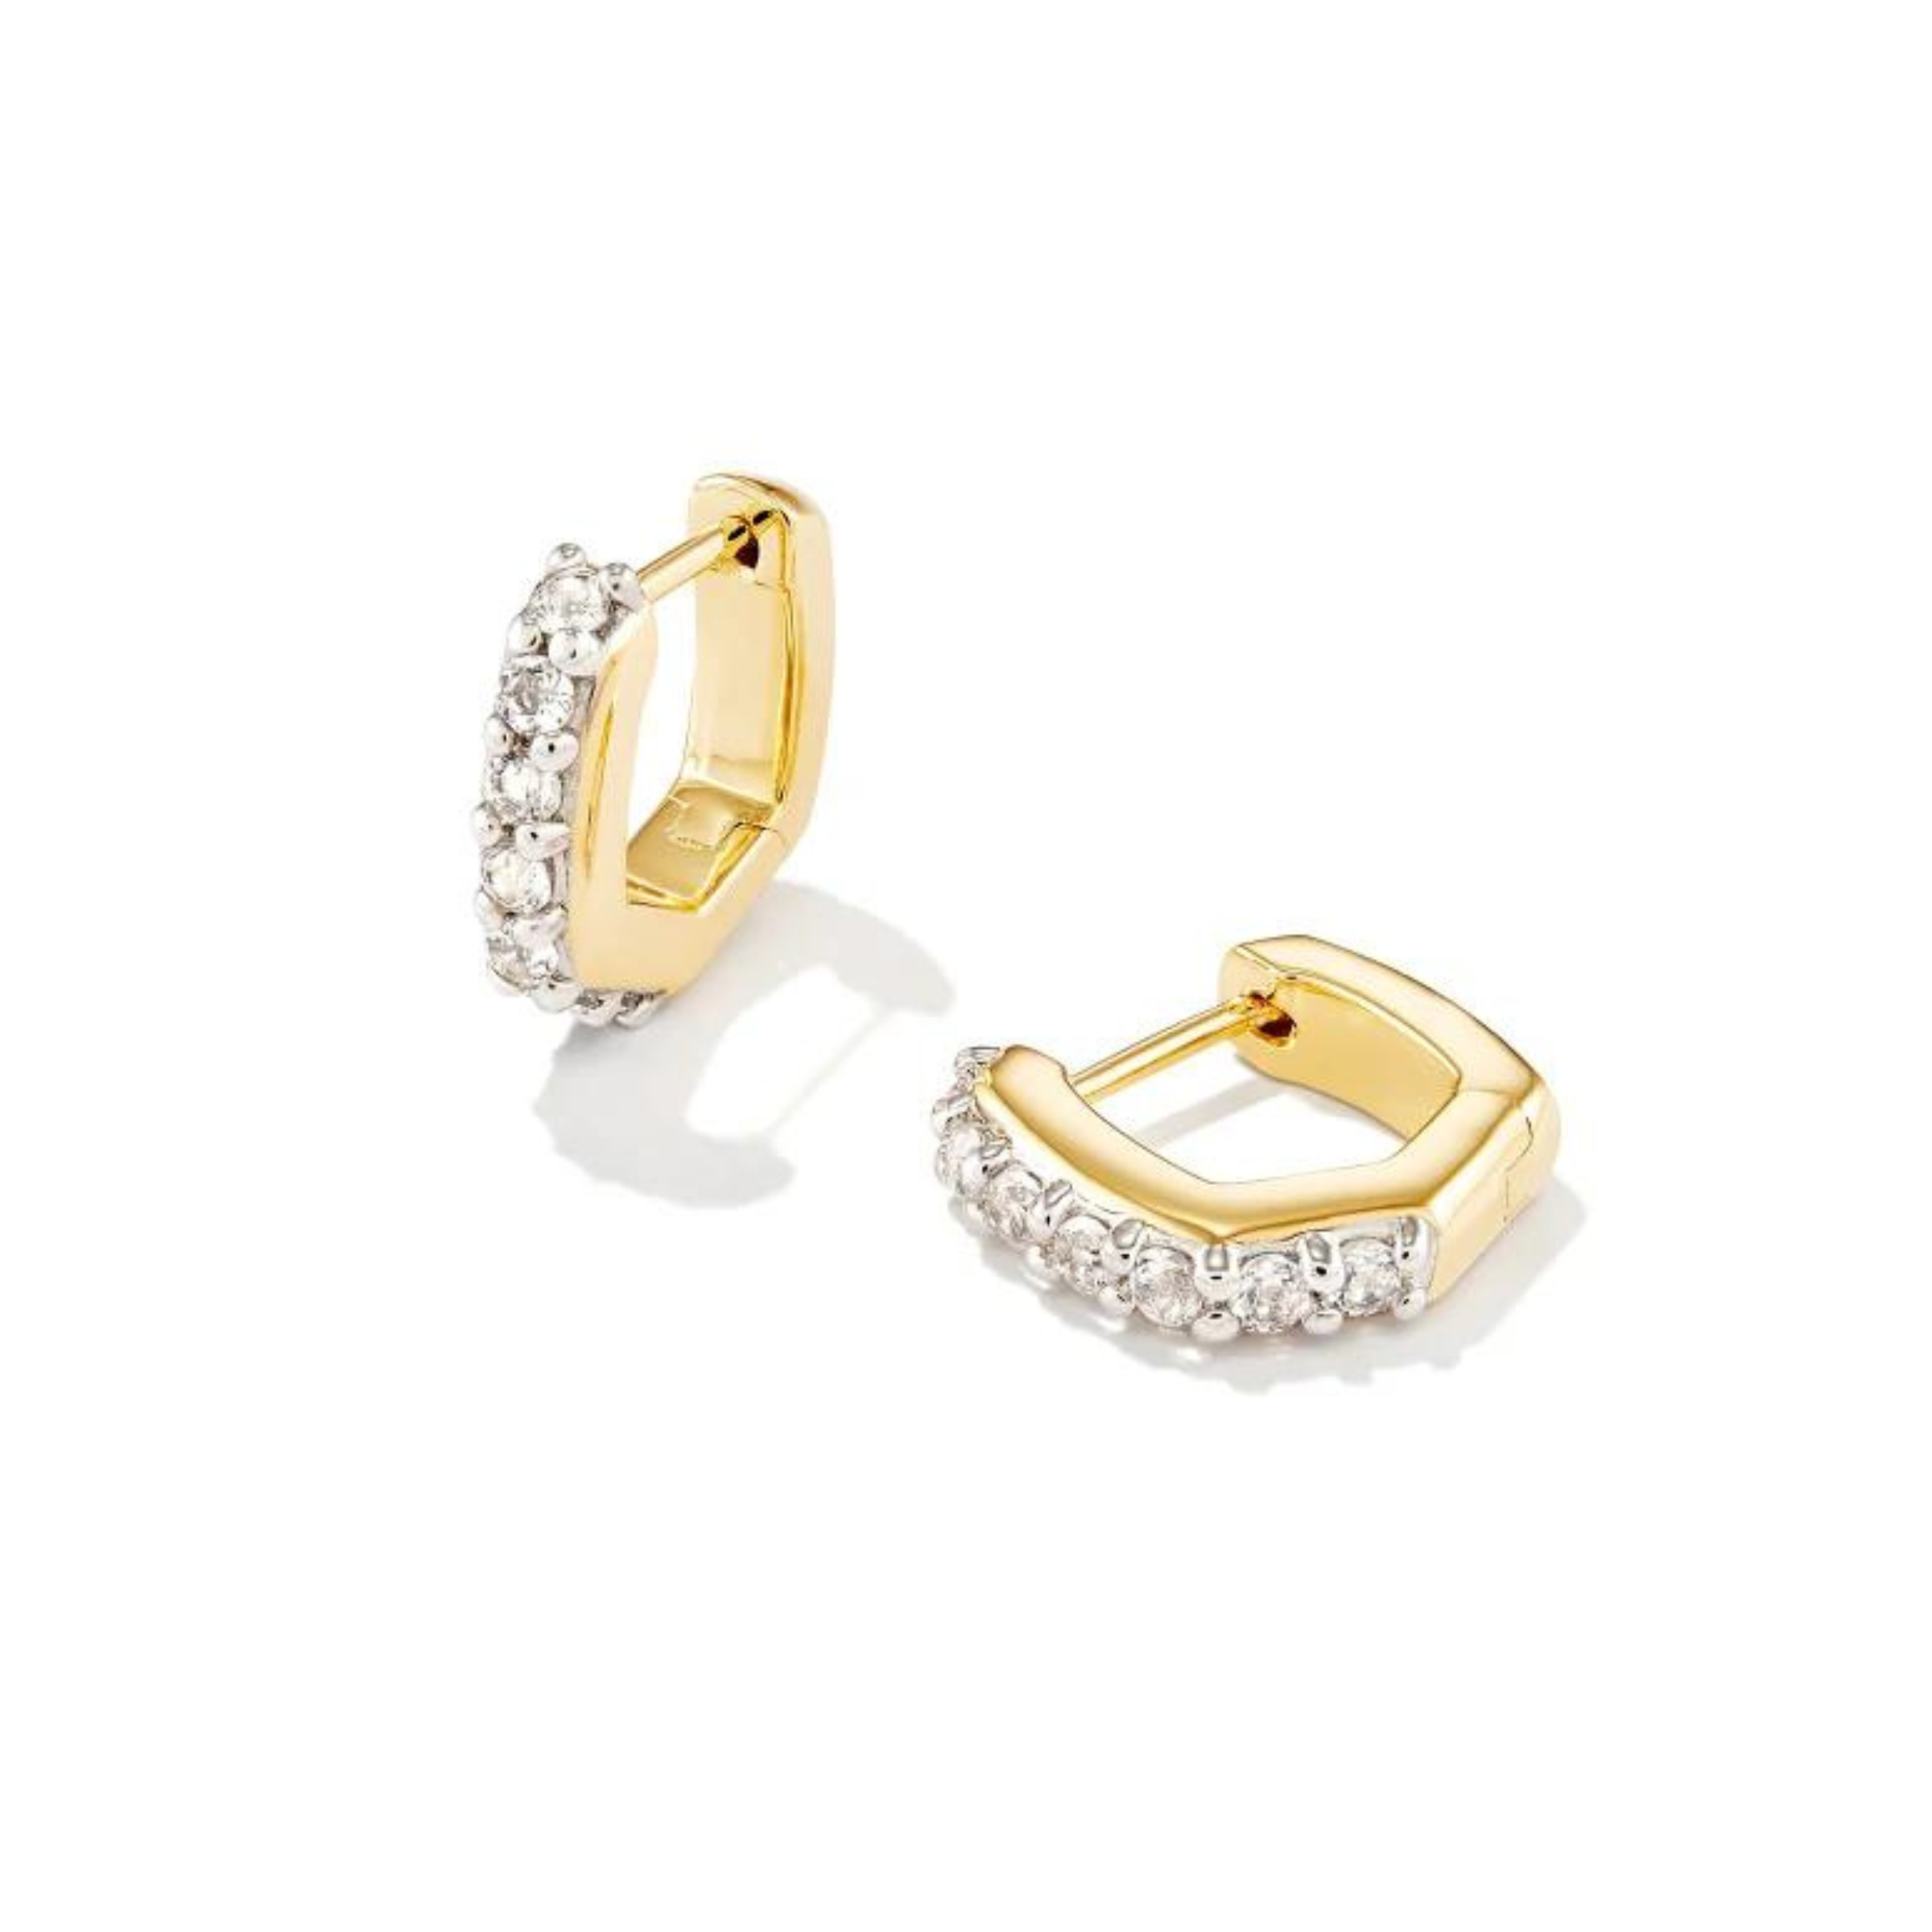 Gold hoop huggies with clear crystals on the front section. These earrings are pictured on a white background. 